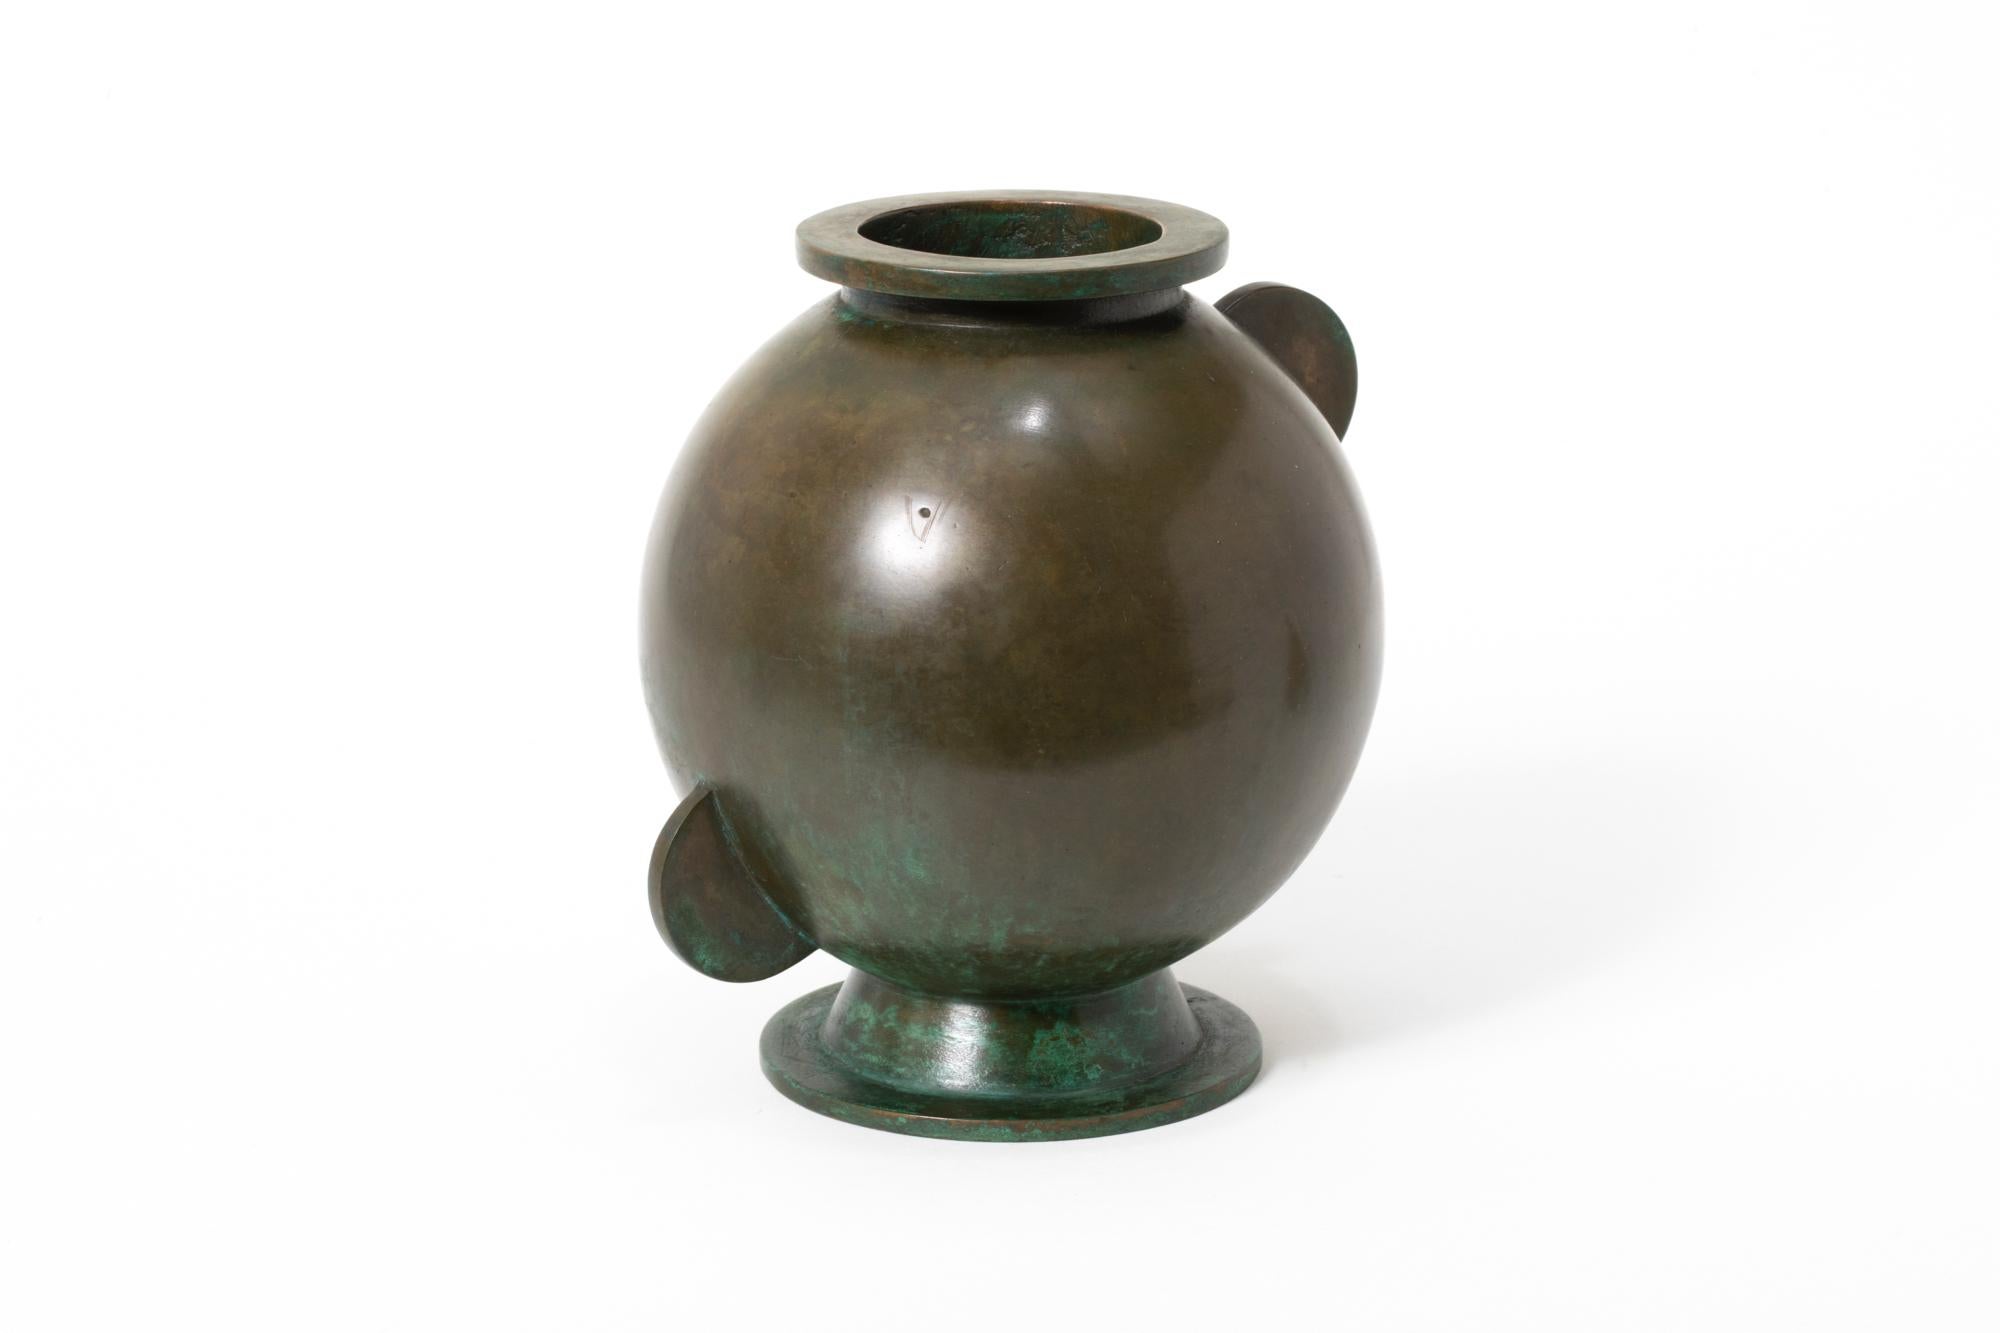 An asymmetrical modernist bronze vase created by the Swedish designer Sune Bäckström in the 1930s. Stamped with a makers mark, this Art Deco piece is representative of Bäckström's fine metalwork that he distributed out of Malmö, Sweden throughout